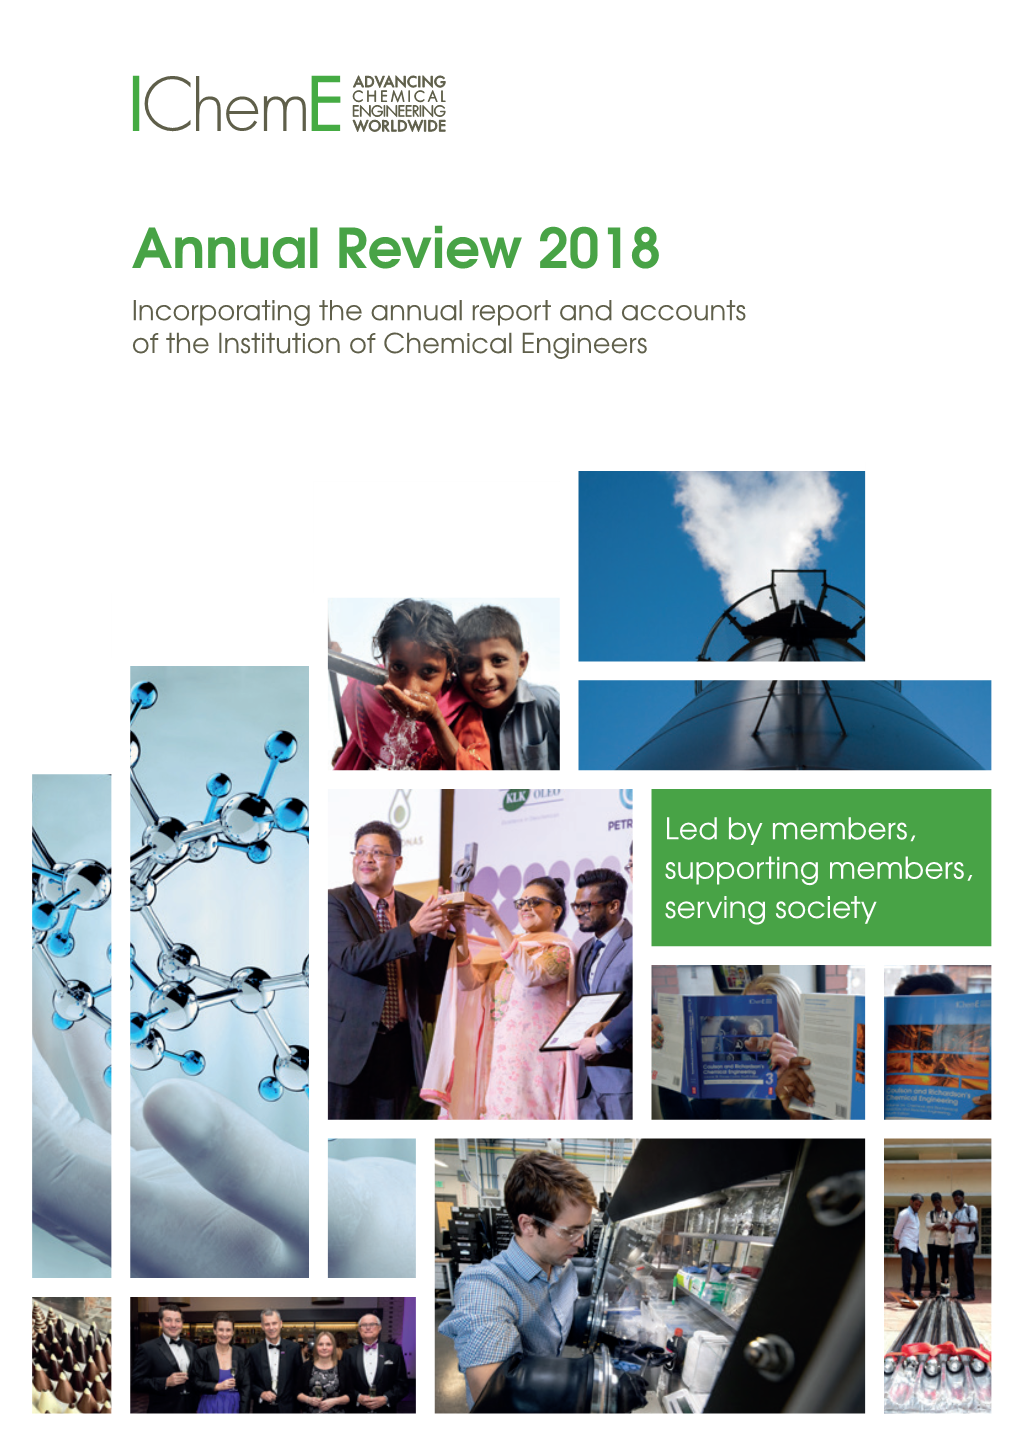 Annual Review 2018 Incorporating the Annual Report and Accounts of the Institution of Chemical Engineers. View